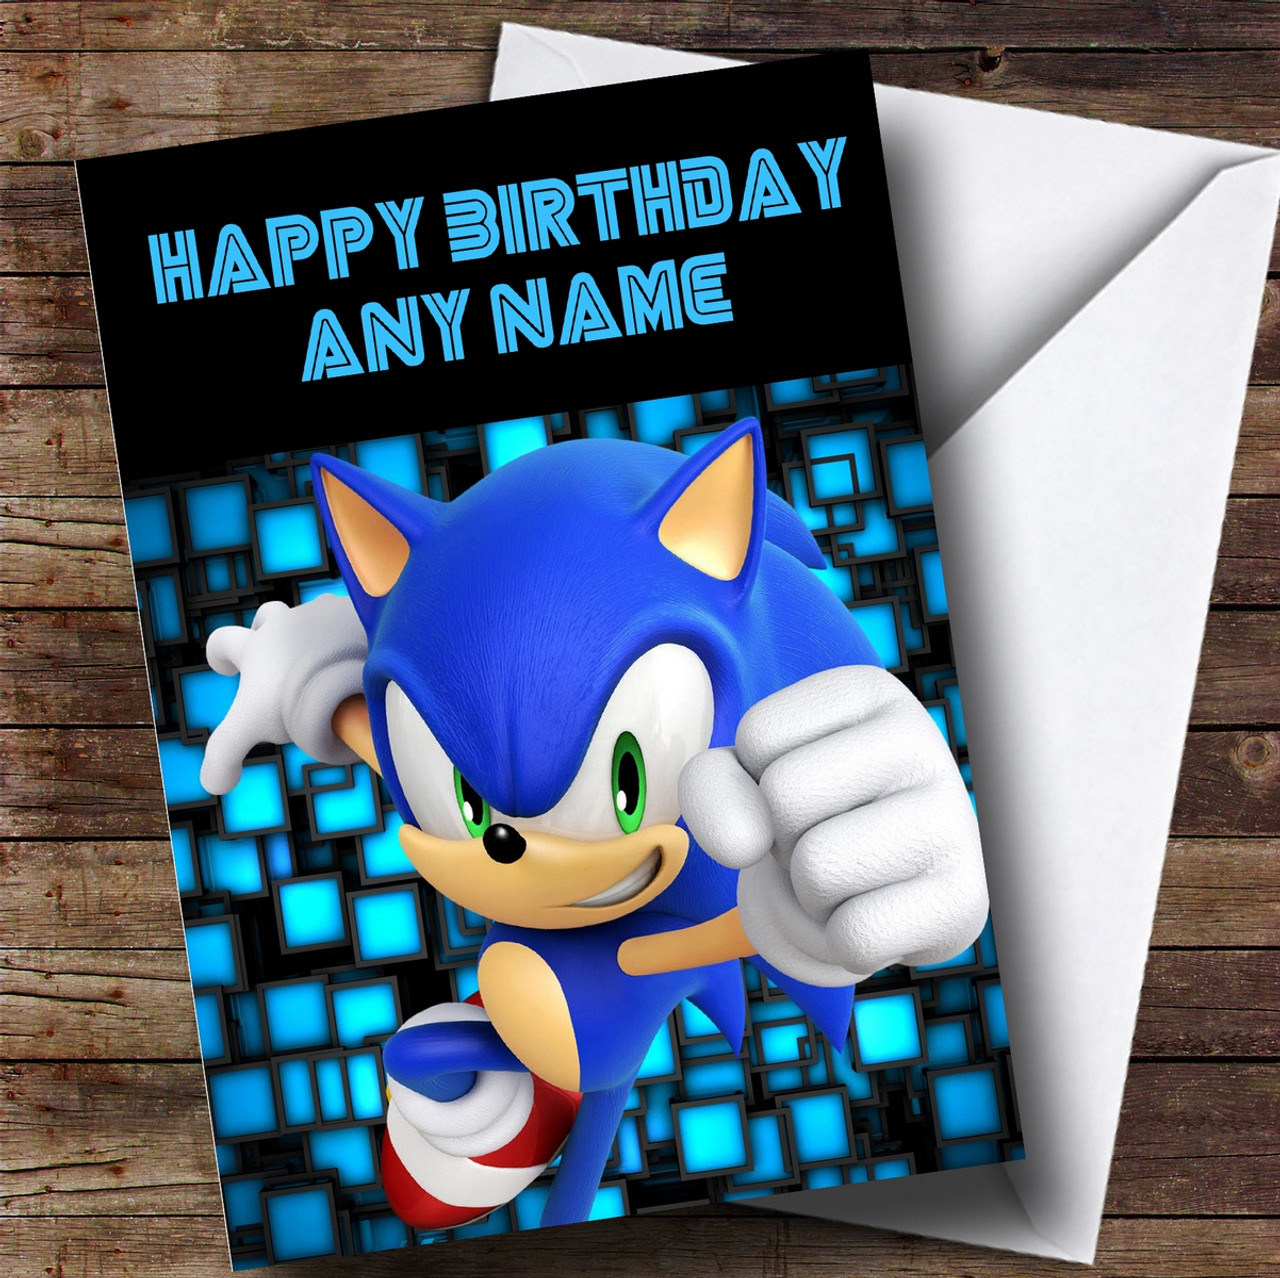 Personalized Black Sonic The Hedgehog Children S Birthday Card Red Heart Print - blue roblox personalized birthday card red heart print